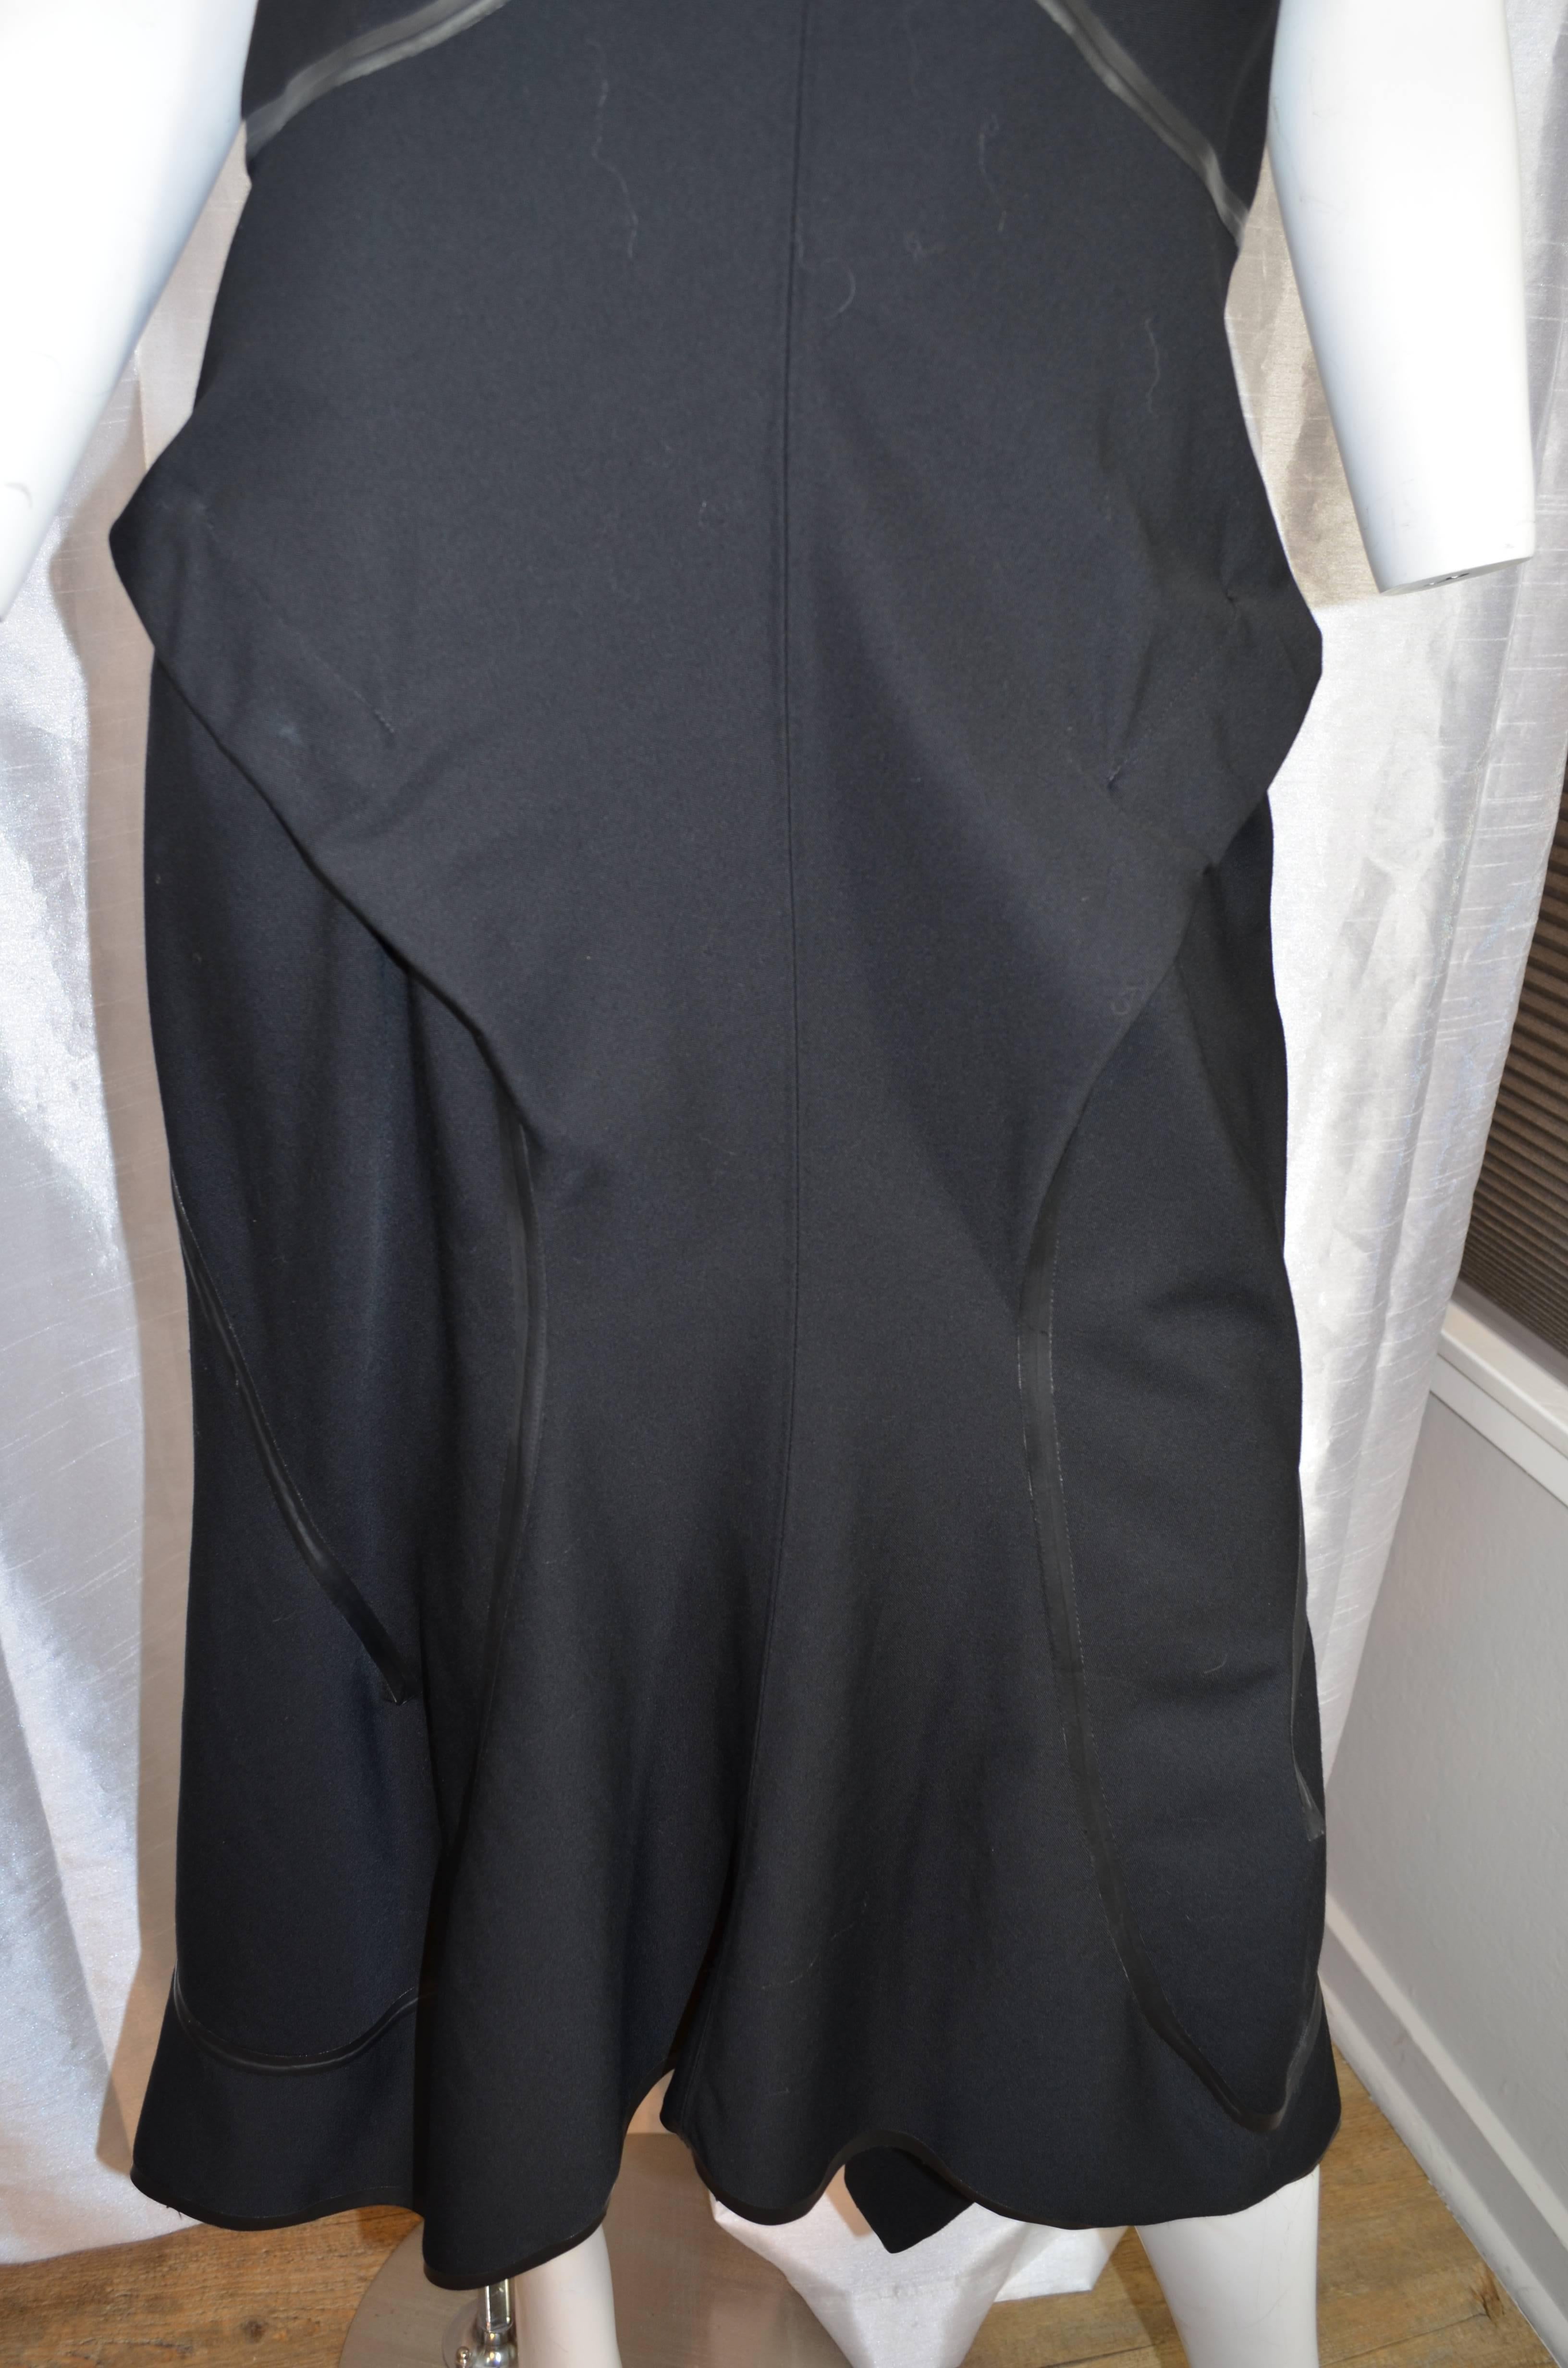 Junya Watanabe Comme des Garçons Dress 2005  In Excellent Condition For Sale In Carmel, CA